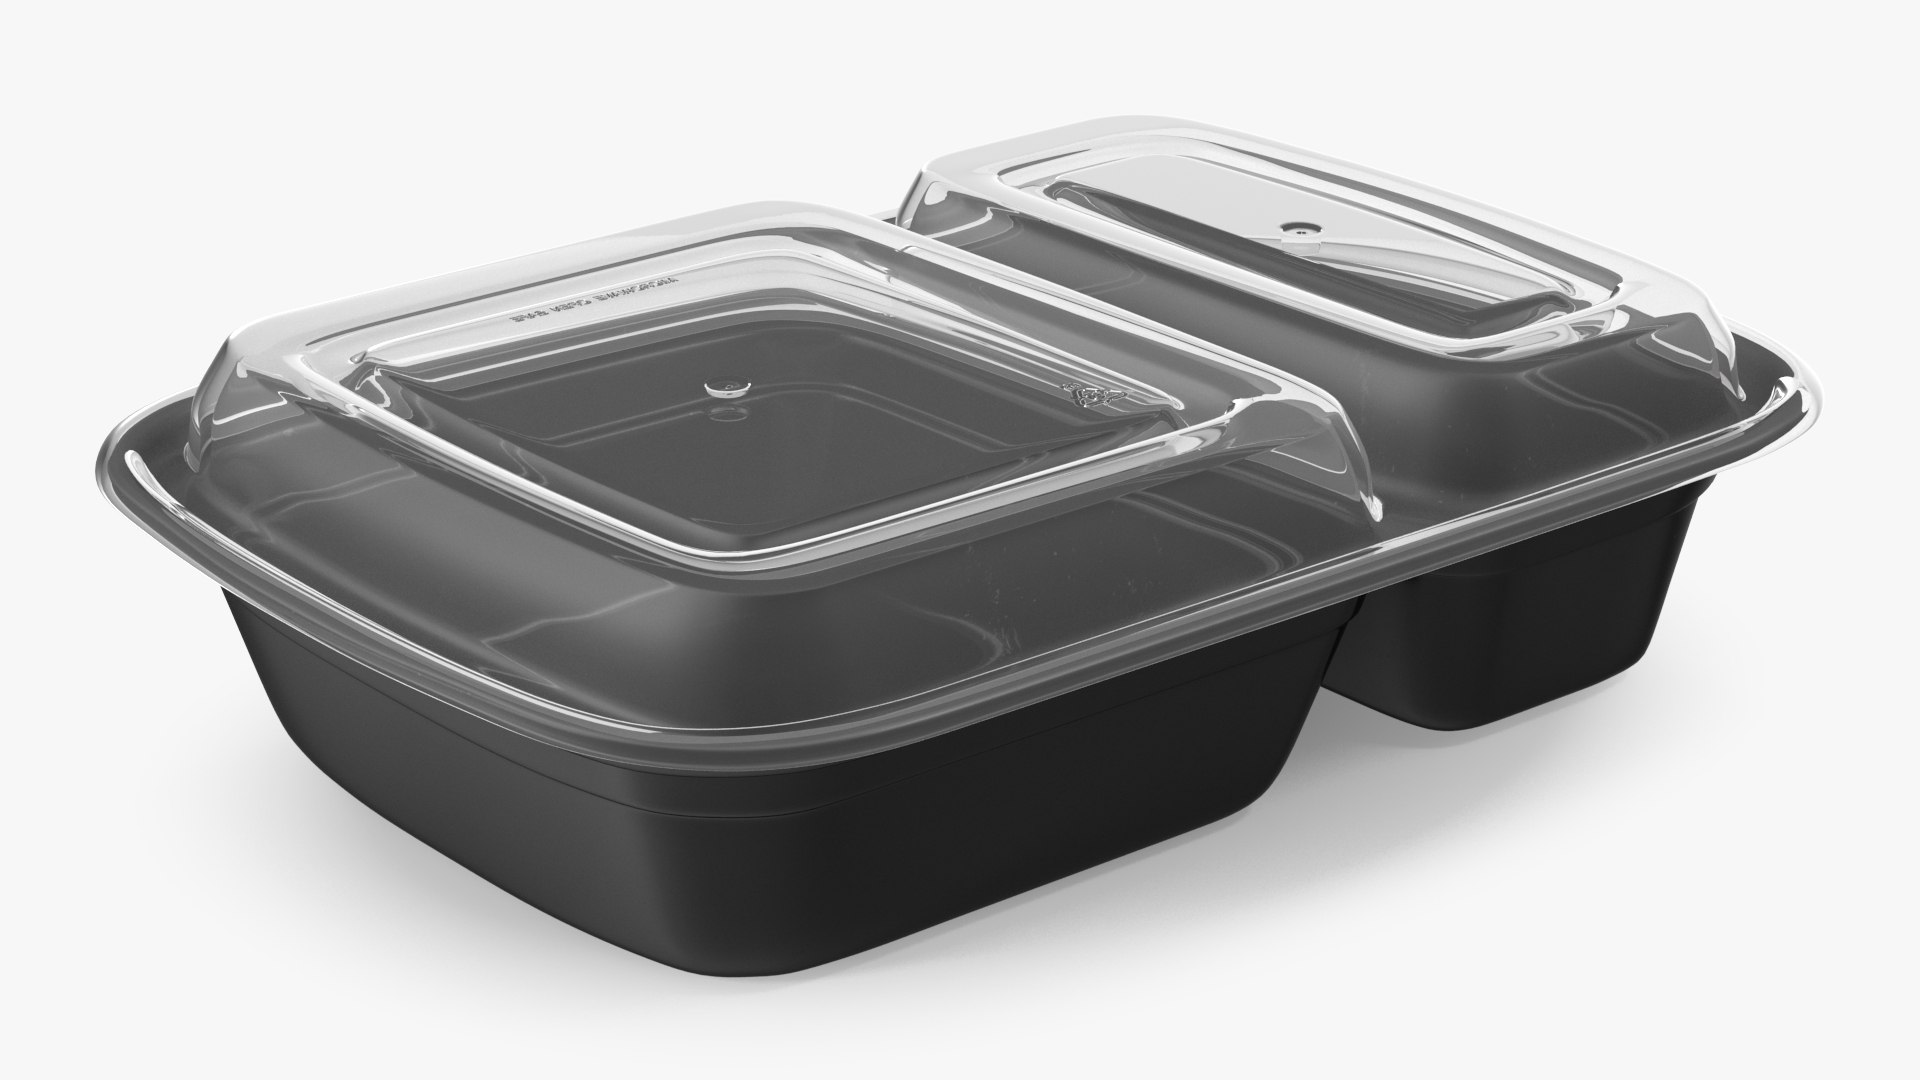 https://p.turbosquid.com/ts-thumb/VH/tRX2vg/gH/plastic2compartmentfoodcontainerwithclearlidc4dmodel001/jpg/1635549406/1920x1080/fit_q87/6838353a96c3cf8981077fc5639f2c2f92c9600d/plastic2compartmentfoodcontainerwithclearlidc4dmodel001.jpg